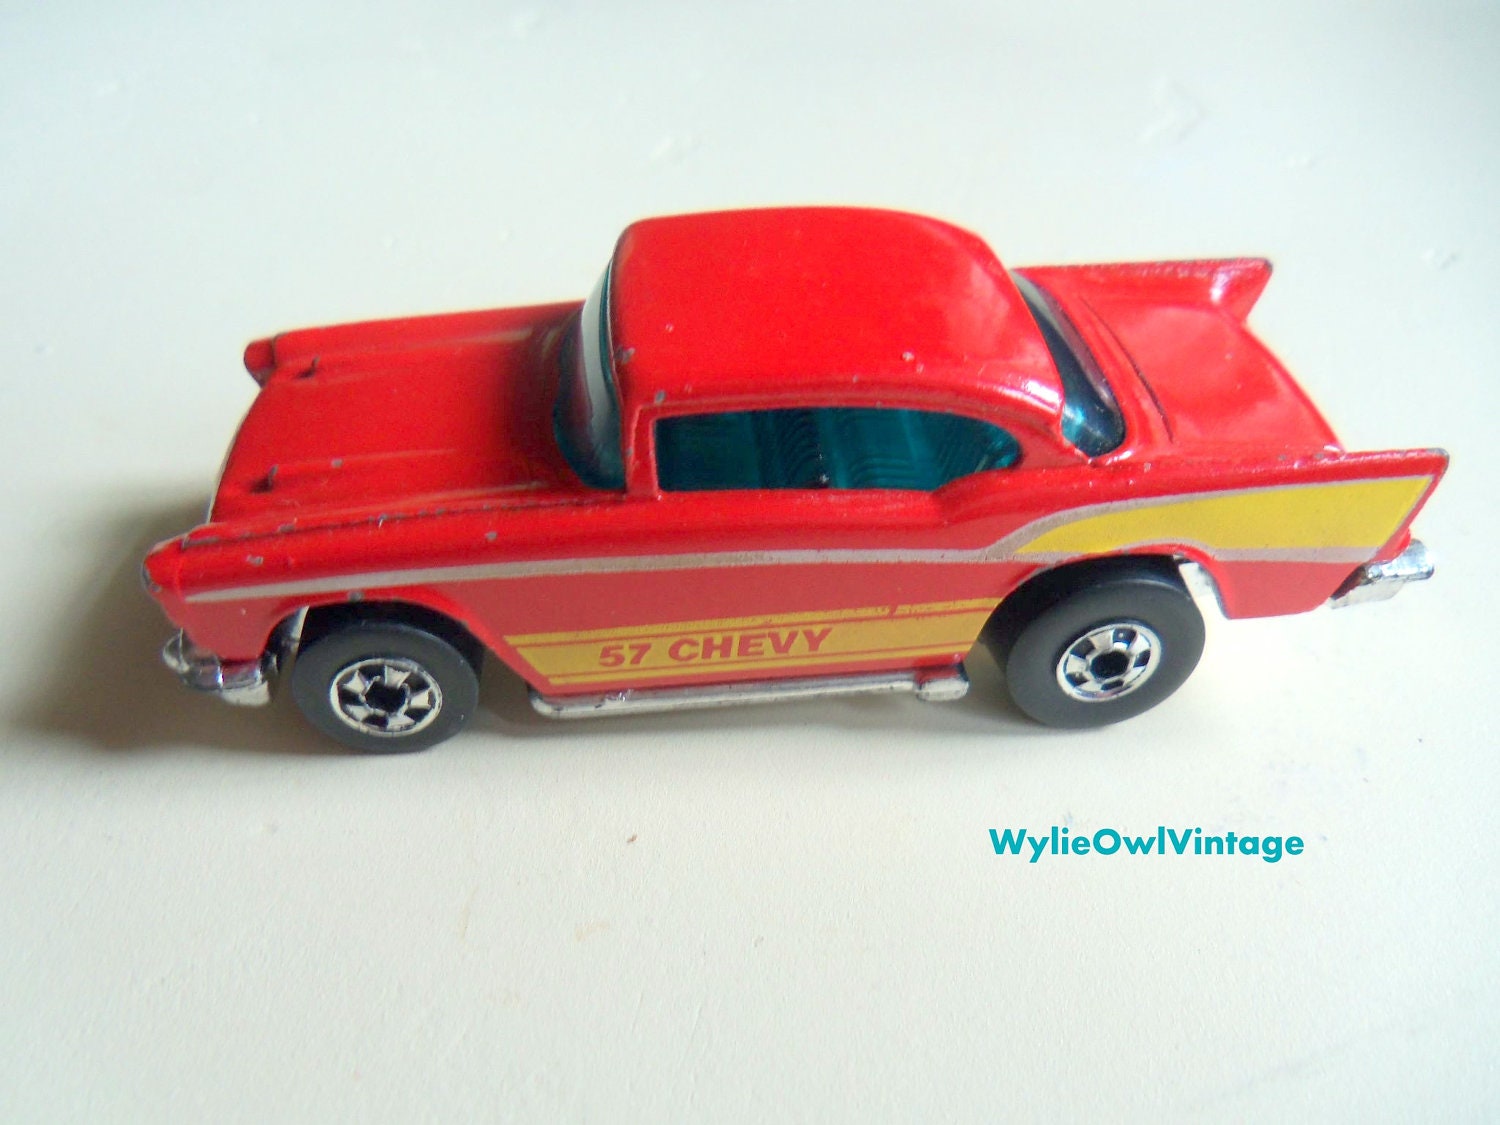 Vintage Hot Wheels 57 Chevy Made in Hong Kong 1976 - WylieOwlVintage